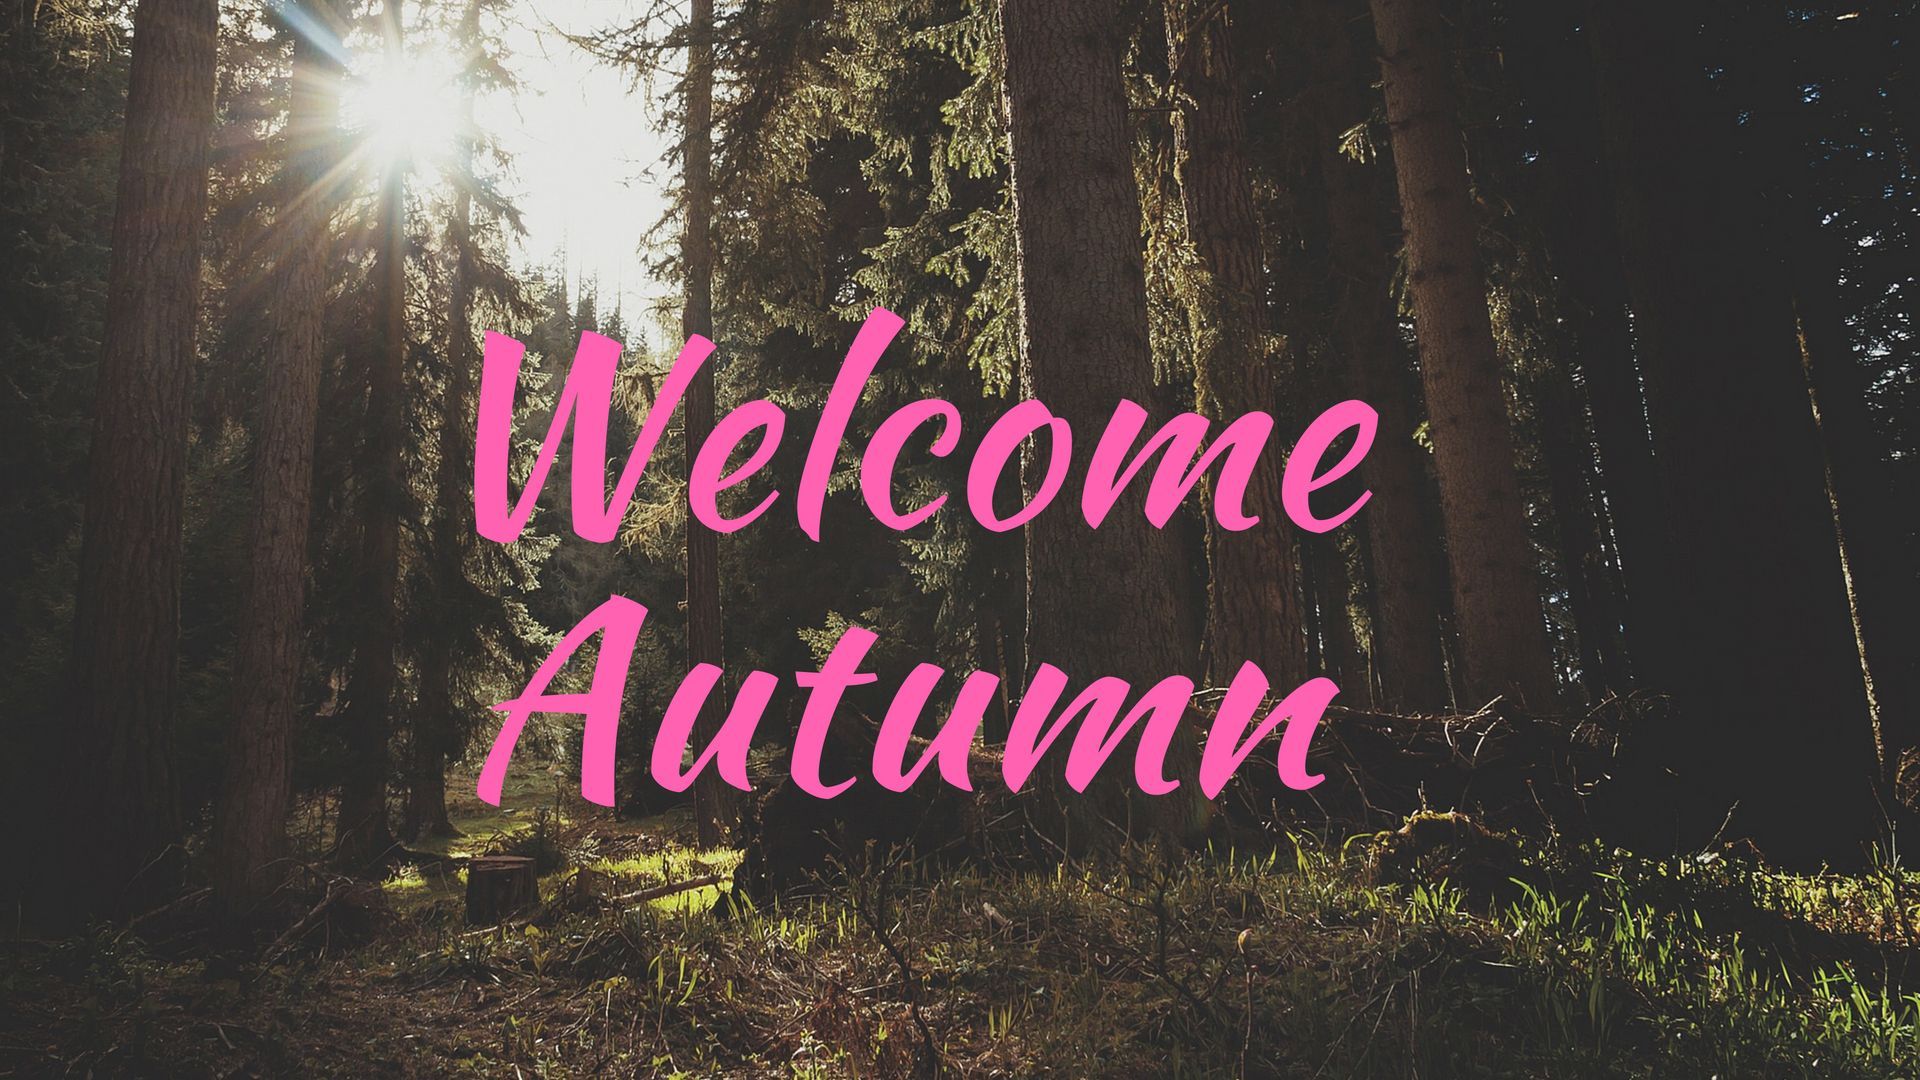 Free Hello Autumn, Welcome September Image And Wallpaper